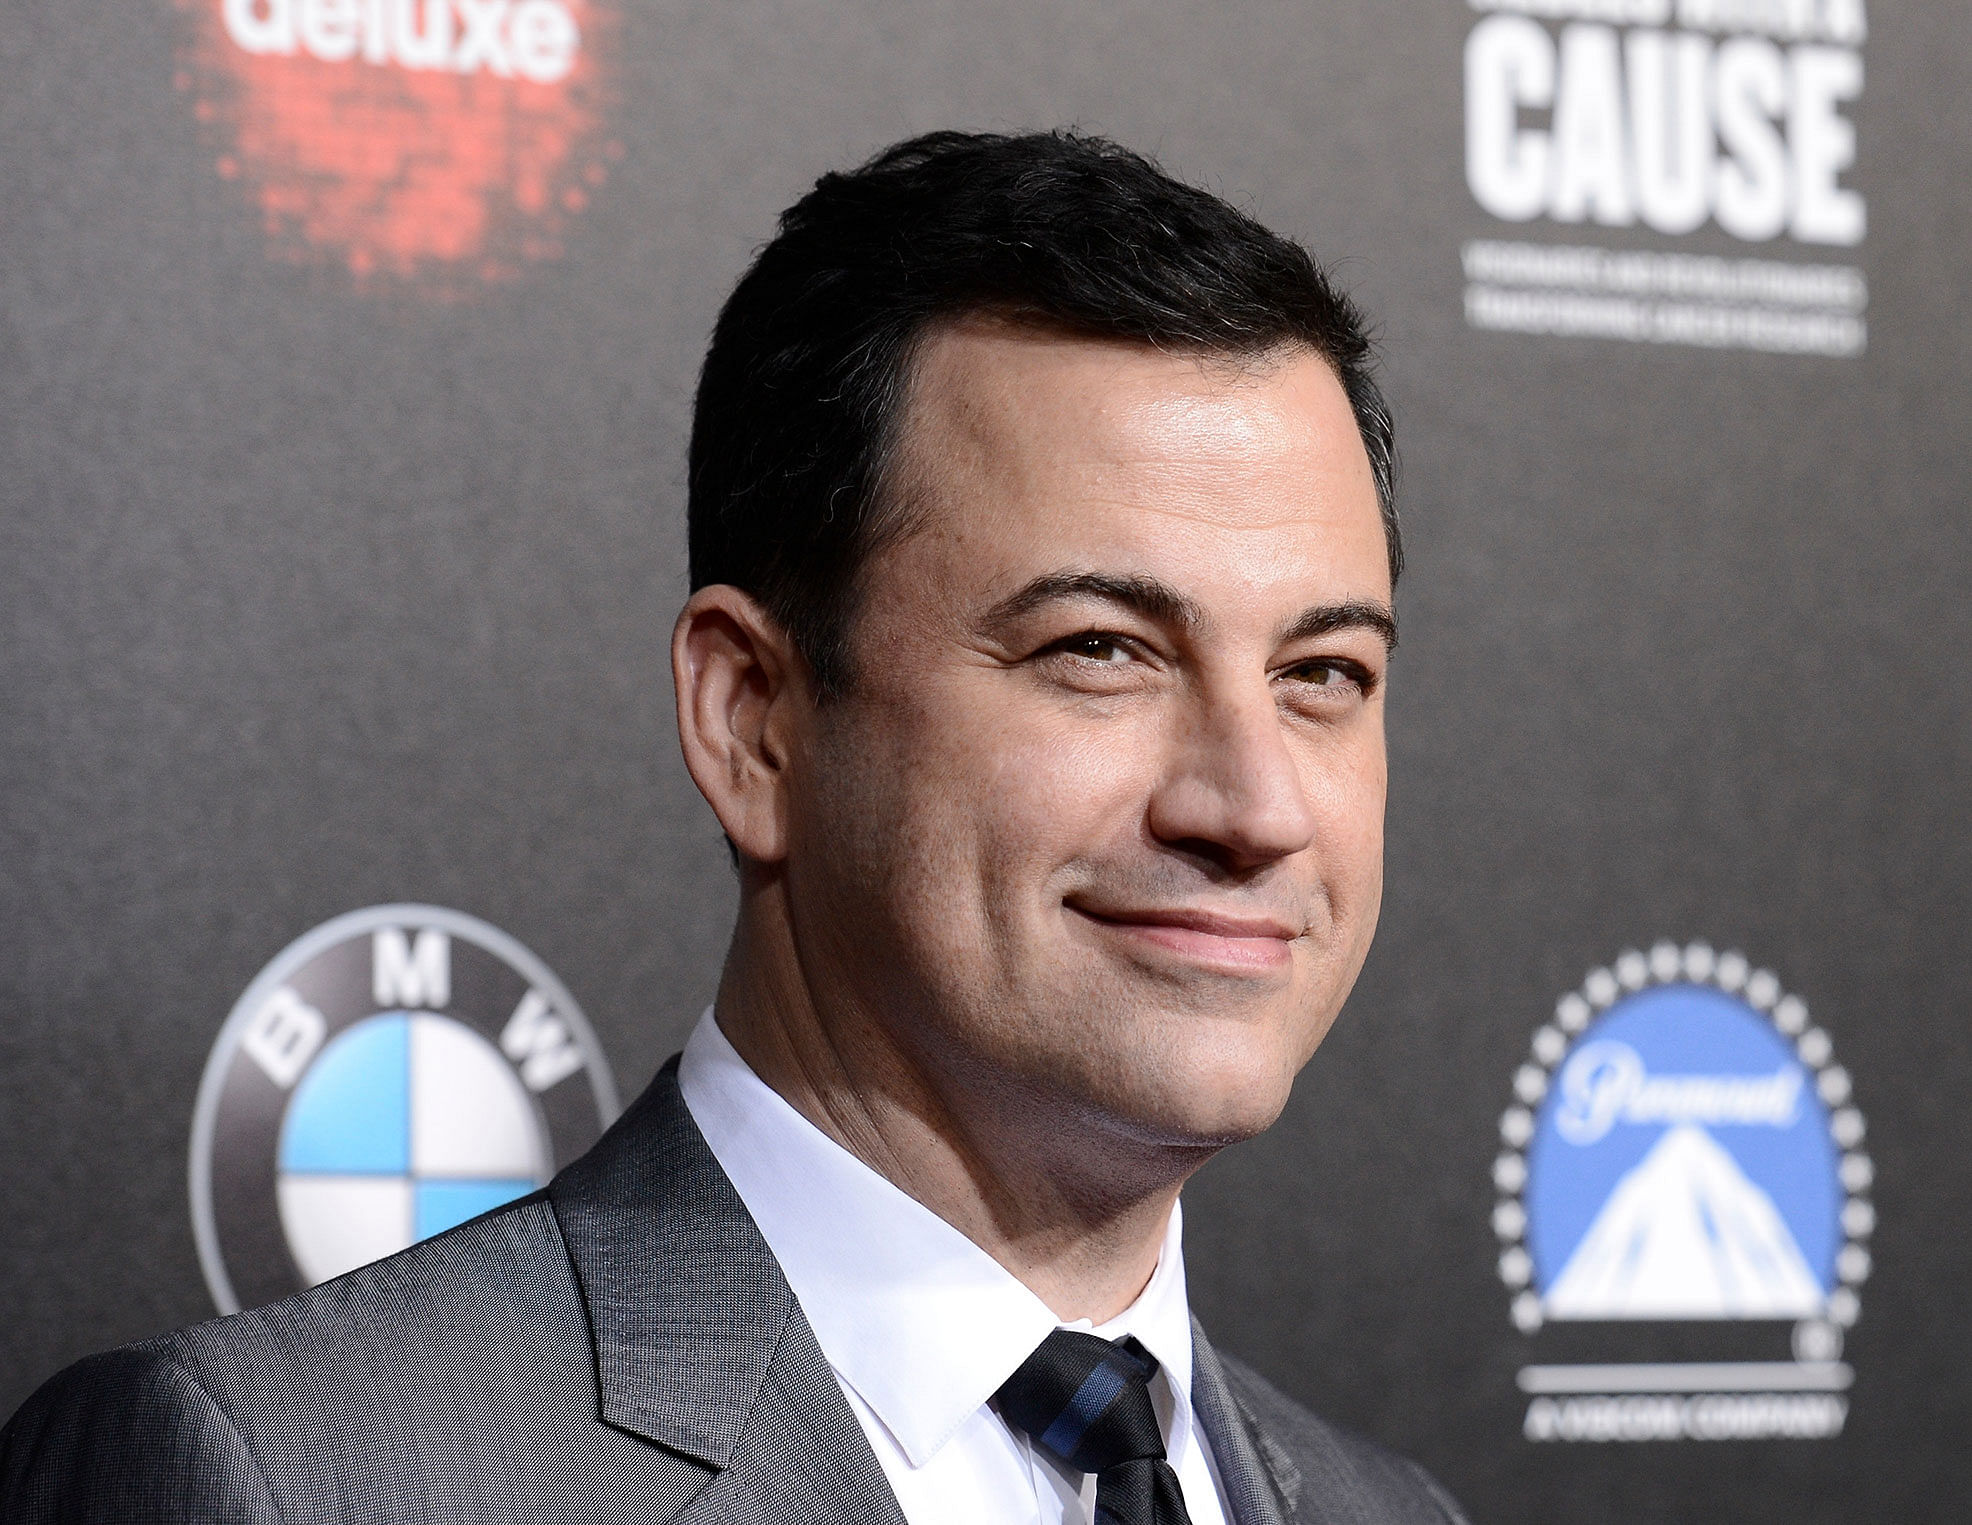 International comedian and host Jimmy Kimmel has topped the Most Dangerous Cyber Celebrity of 2014 list, released by computer security company McAfee. AP file photo